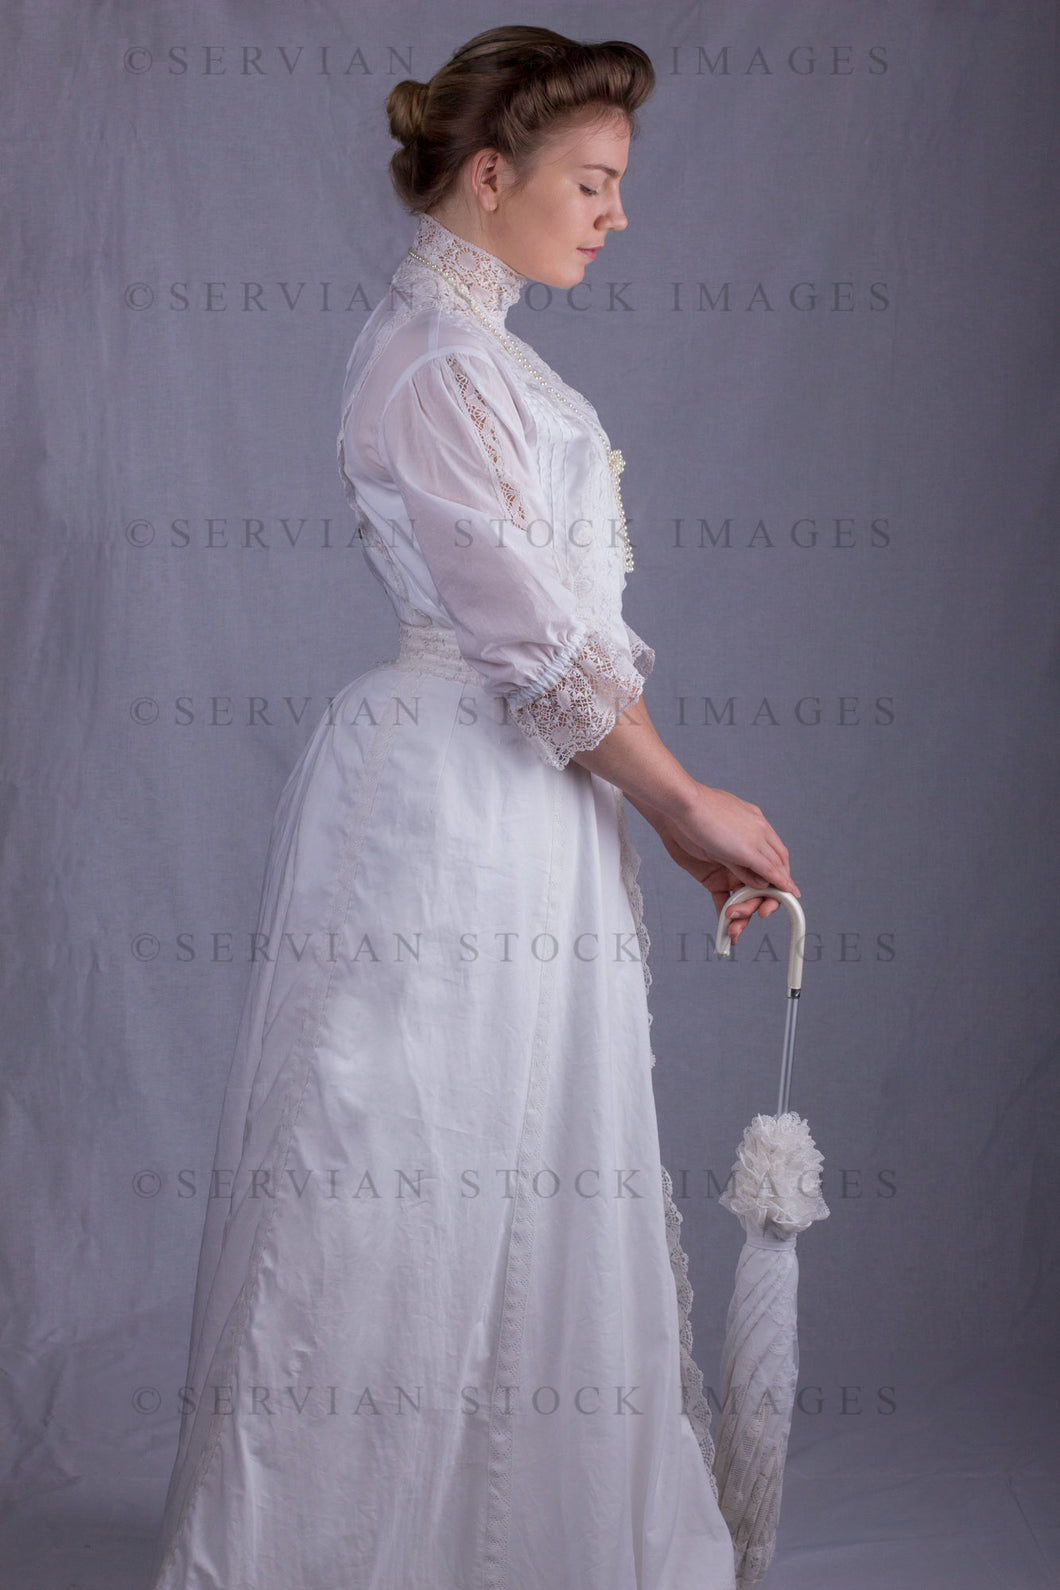 Edwardian woman in a white lace blouse and skirt with a pearl necklace (Tayla 0064)